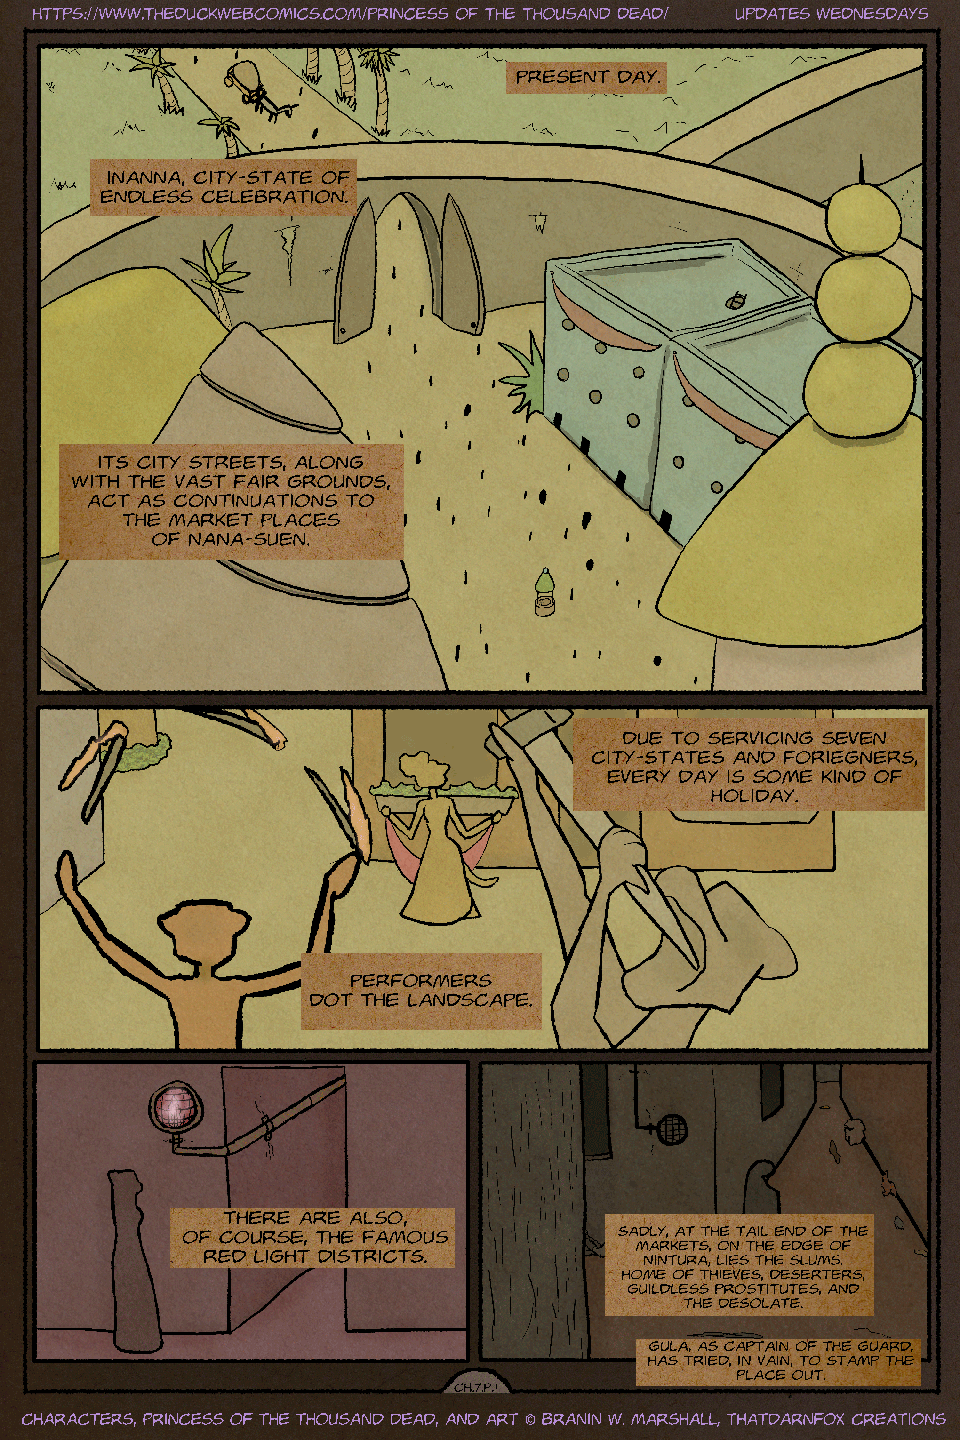 Princess of the Thousand Dead Chapter Seven Page 1